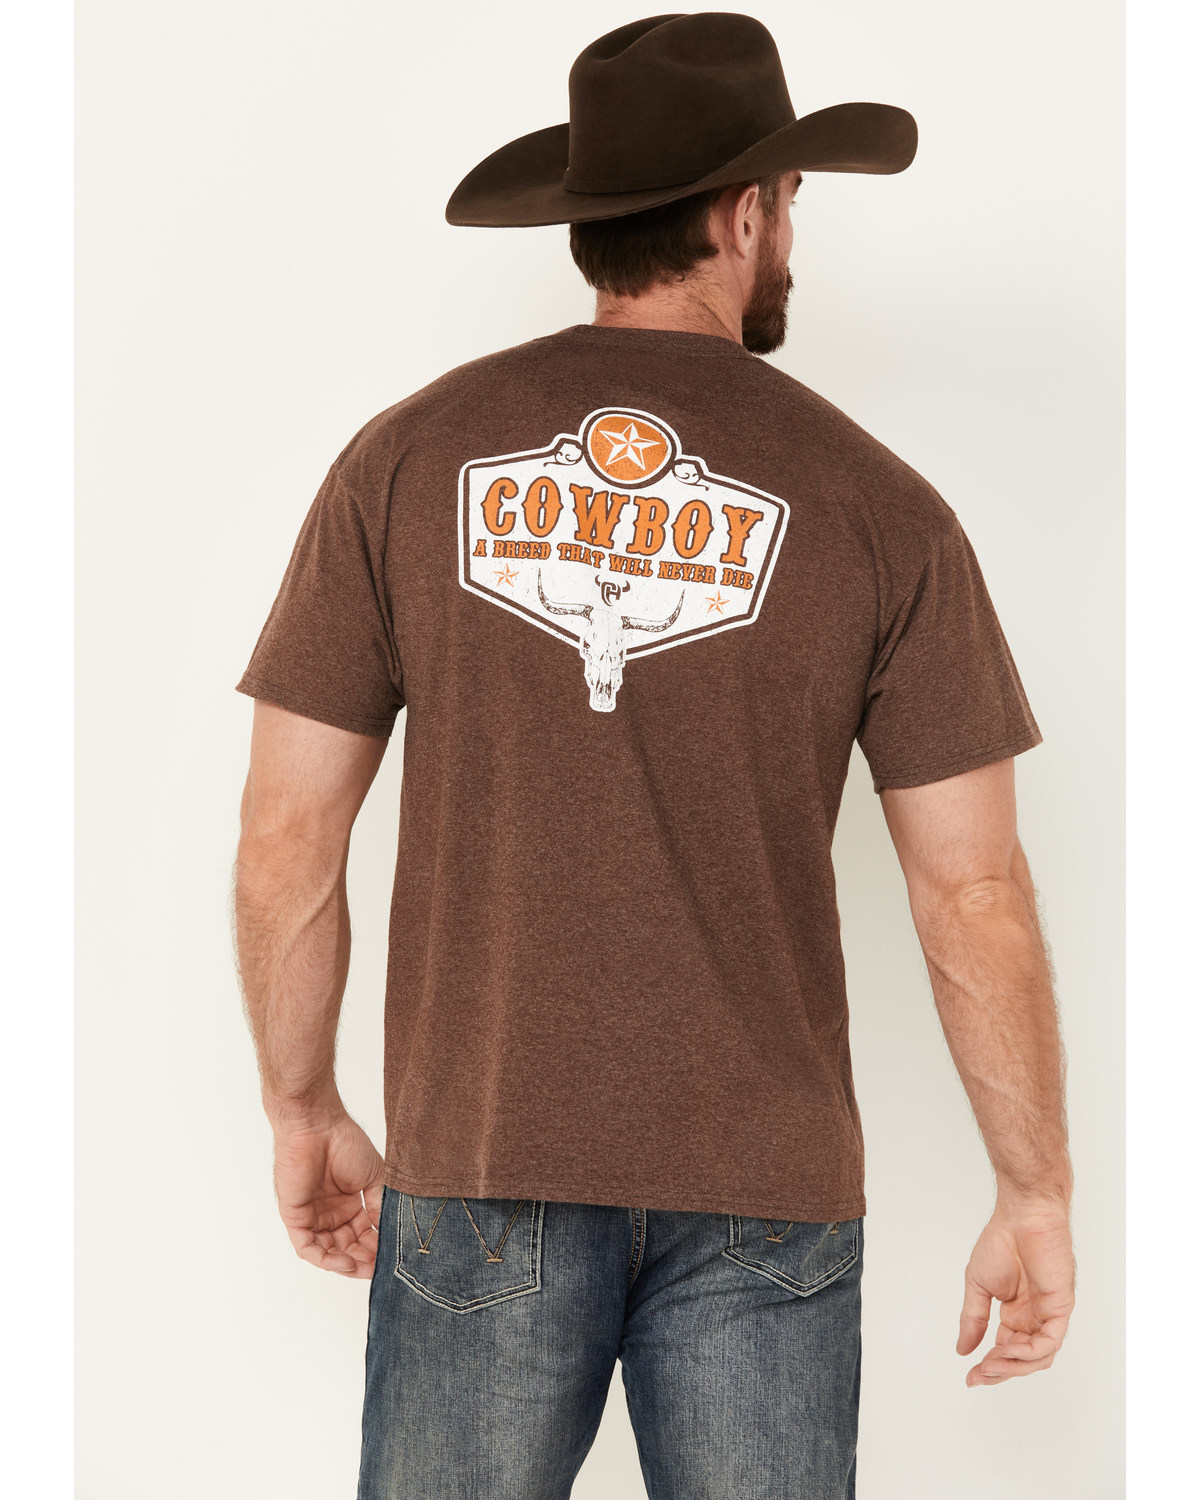 Cowboy Hardware Men's Is A Breed Short Sleeve Graphic T-Shirt